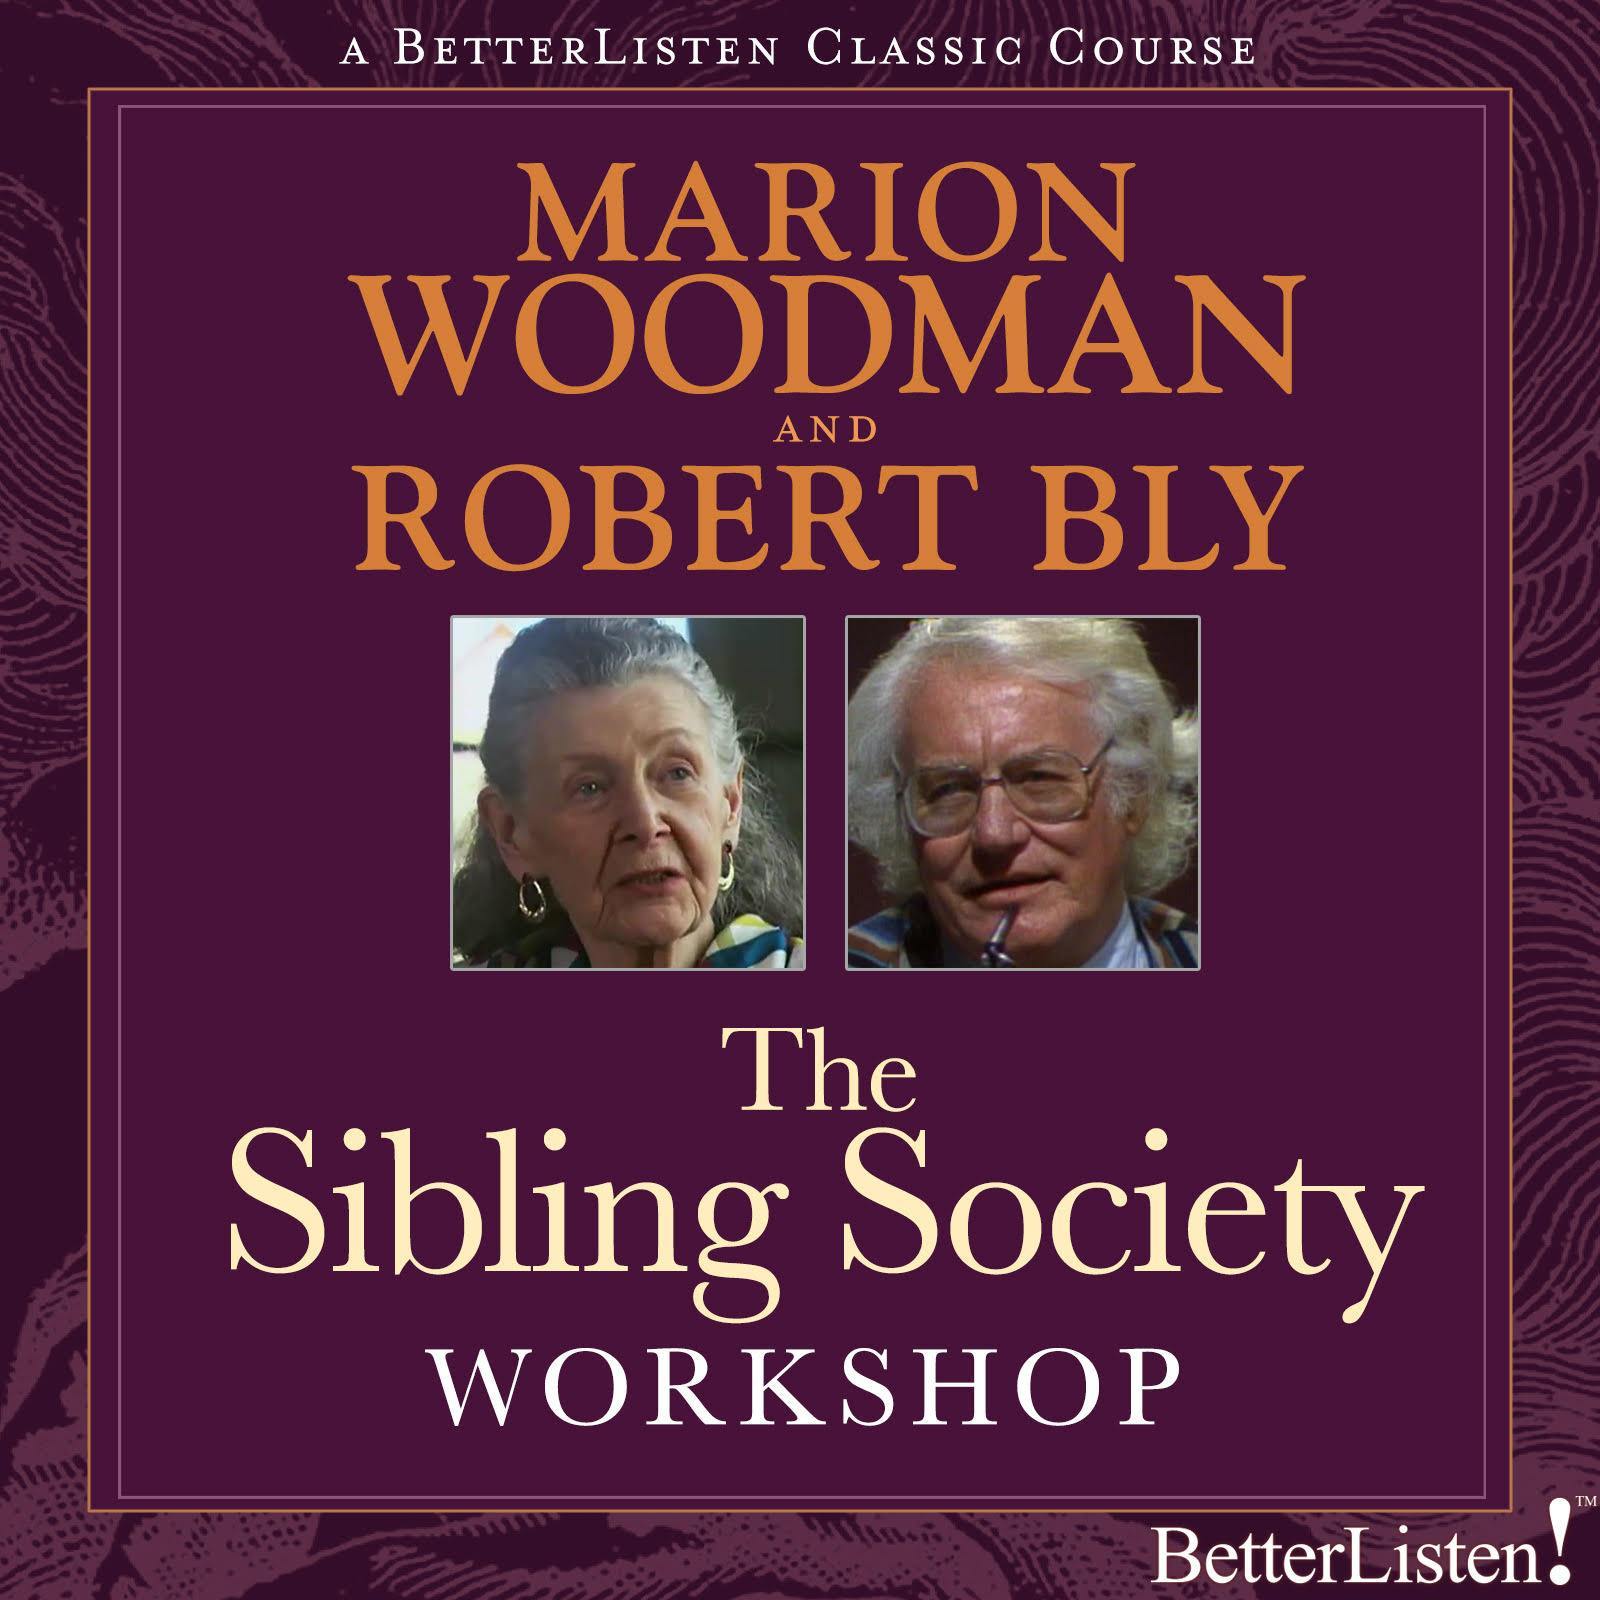 Sibling Society Workshop with Marion Woodman and Robert Bly - BetterListen!